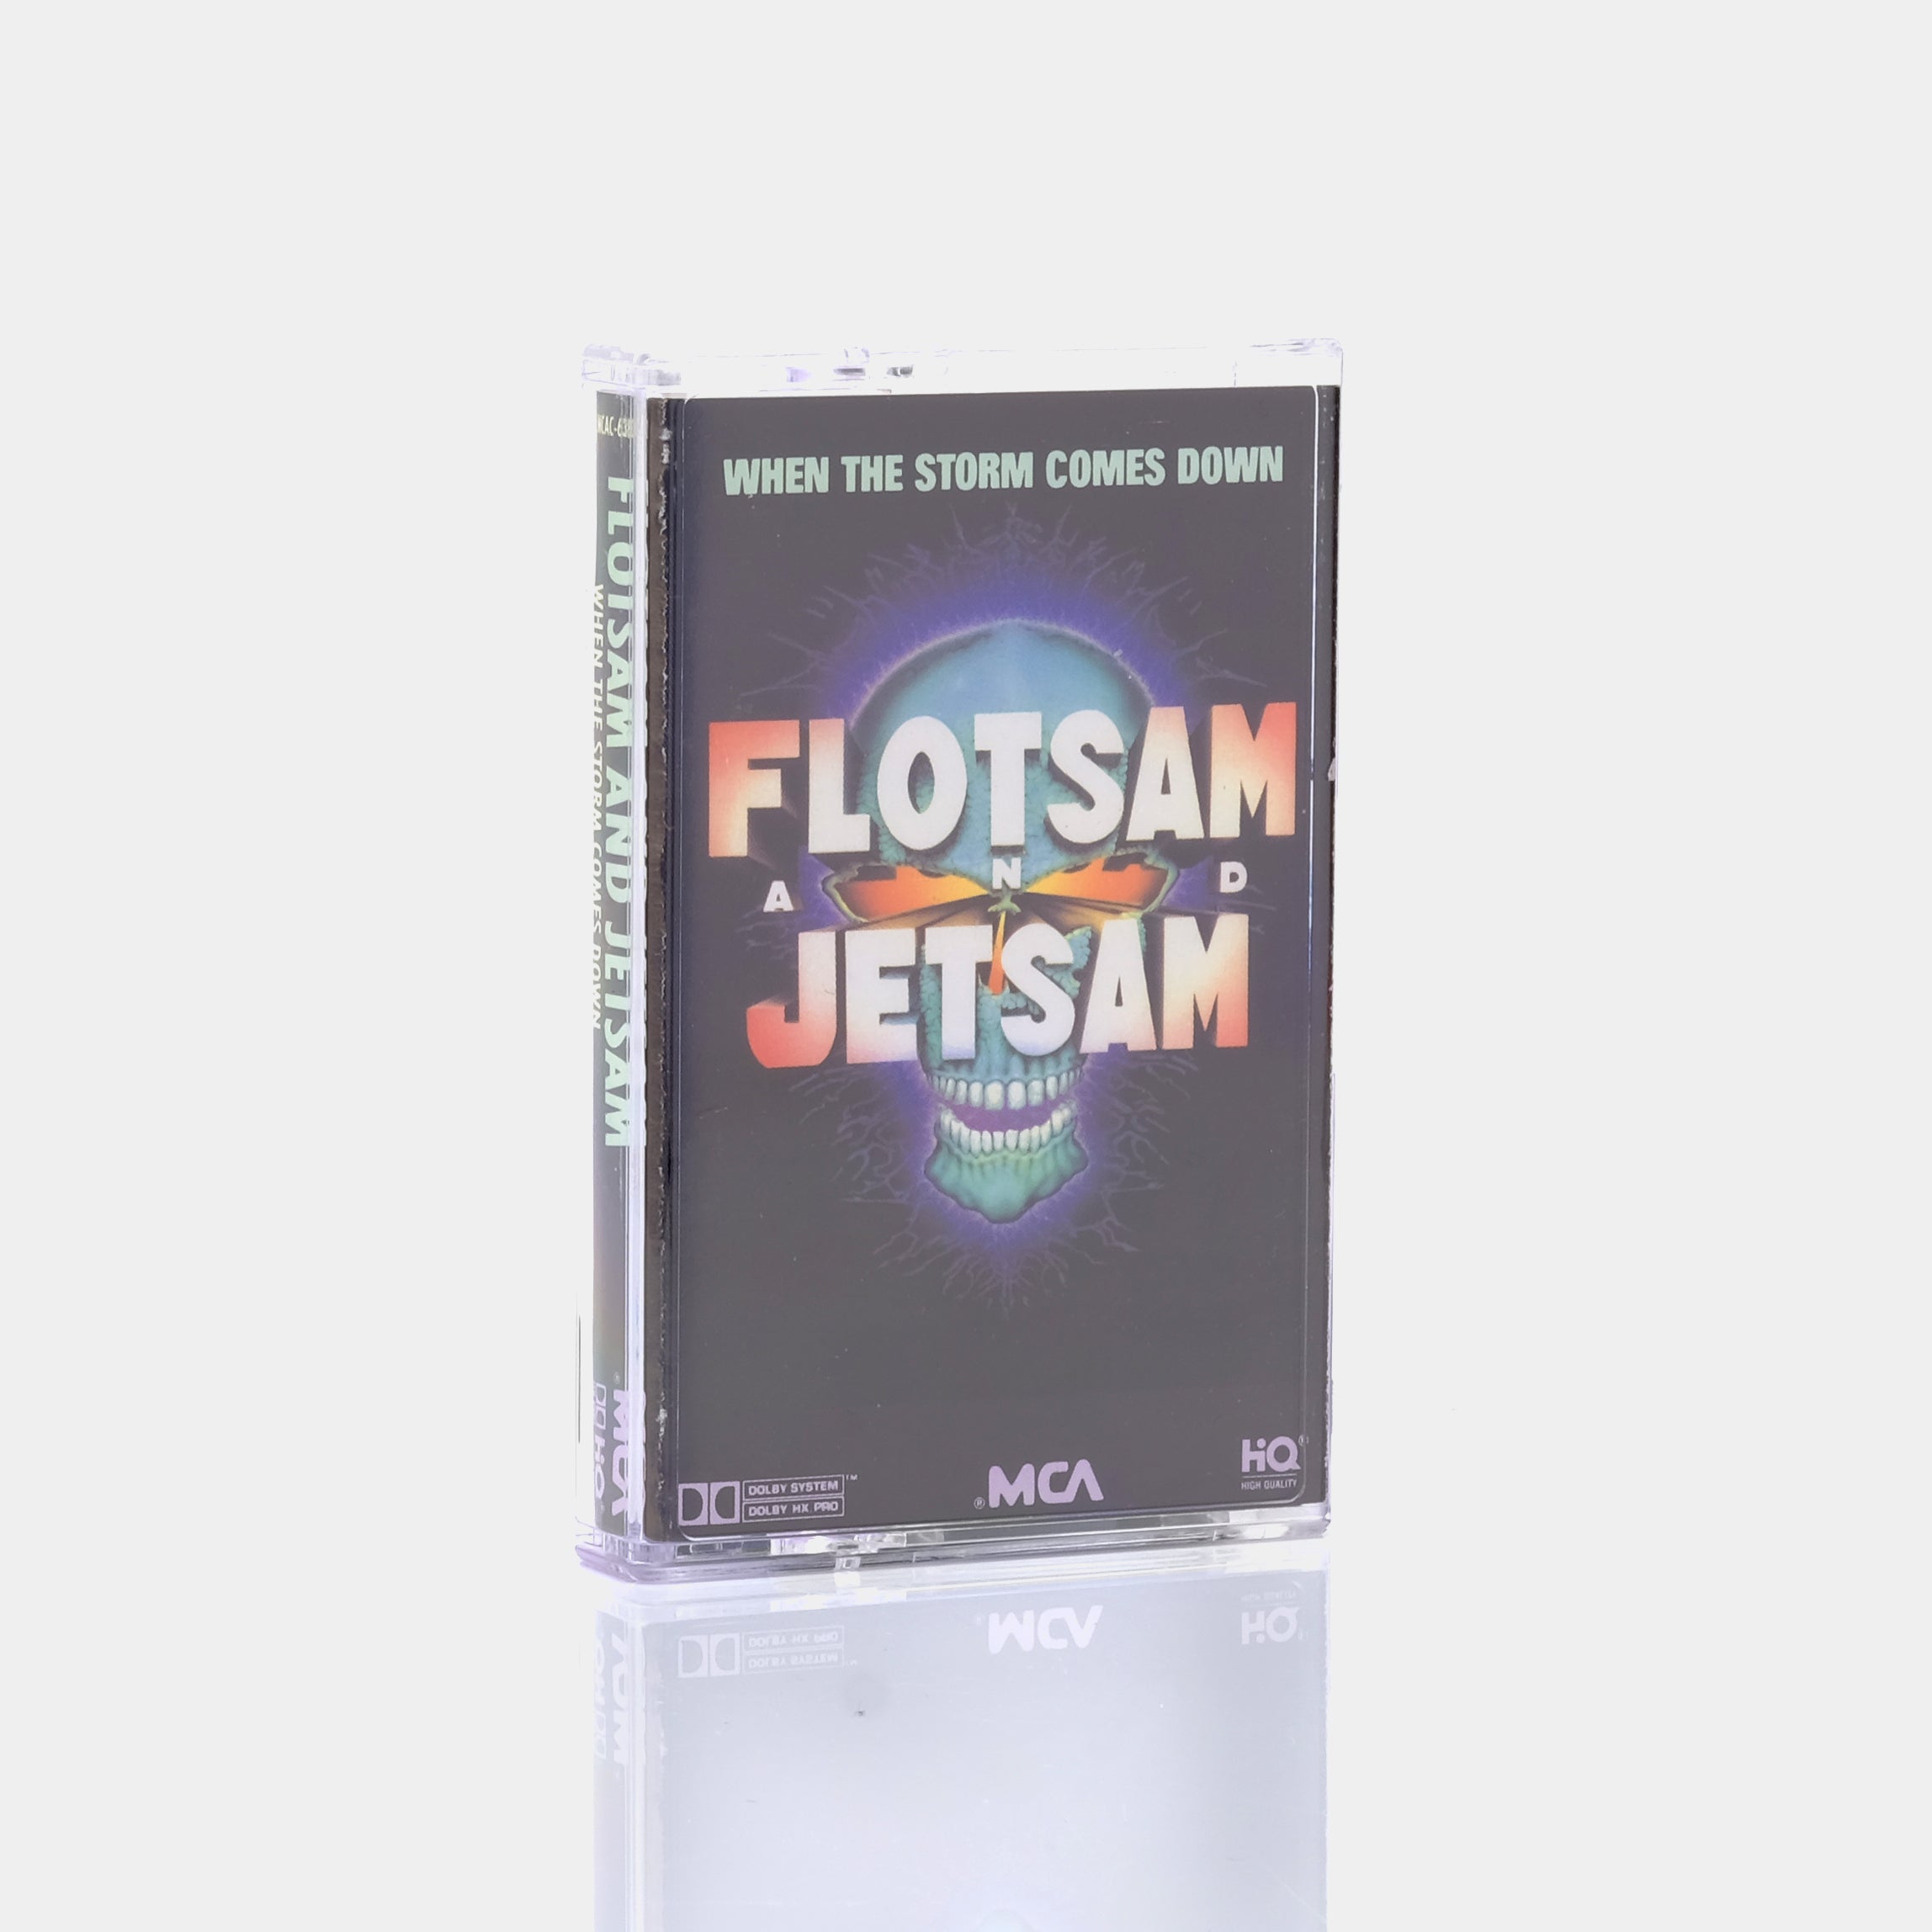 Flotsam And Jetsam - When The Storm Comes Down Cassette Tape